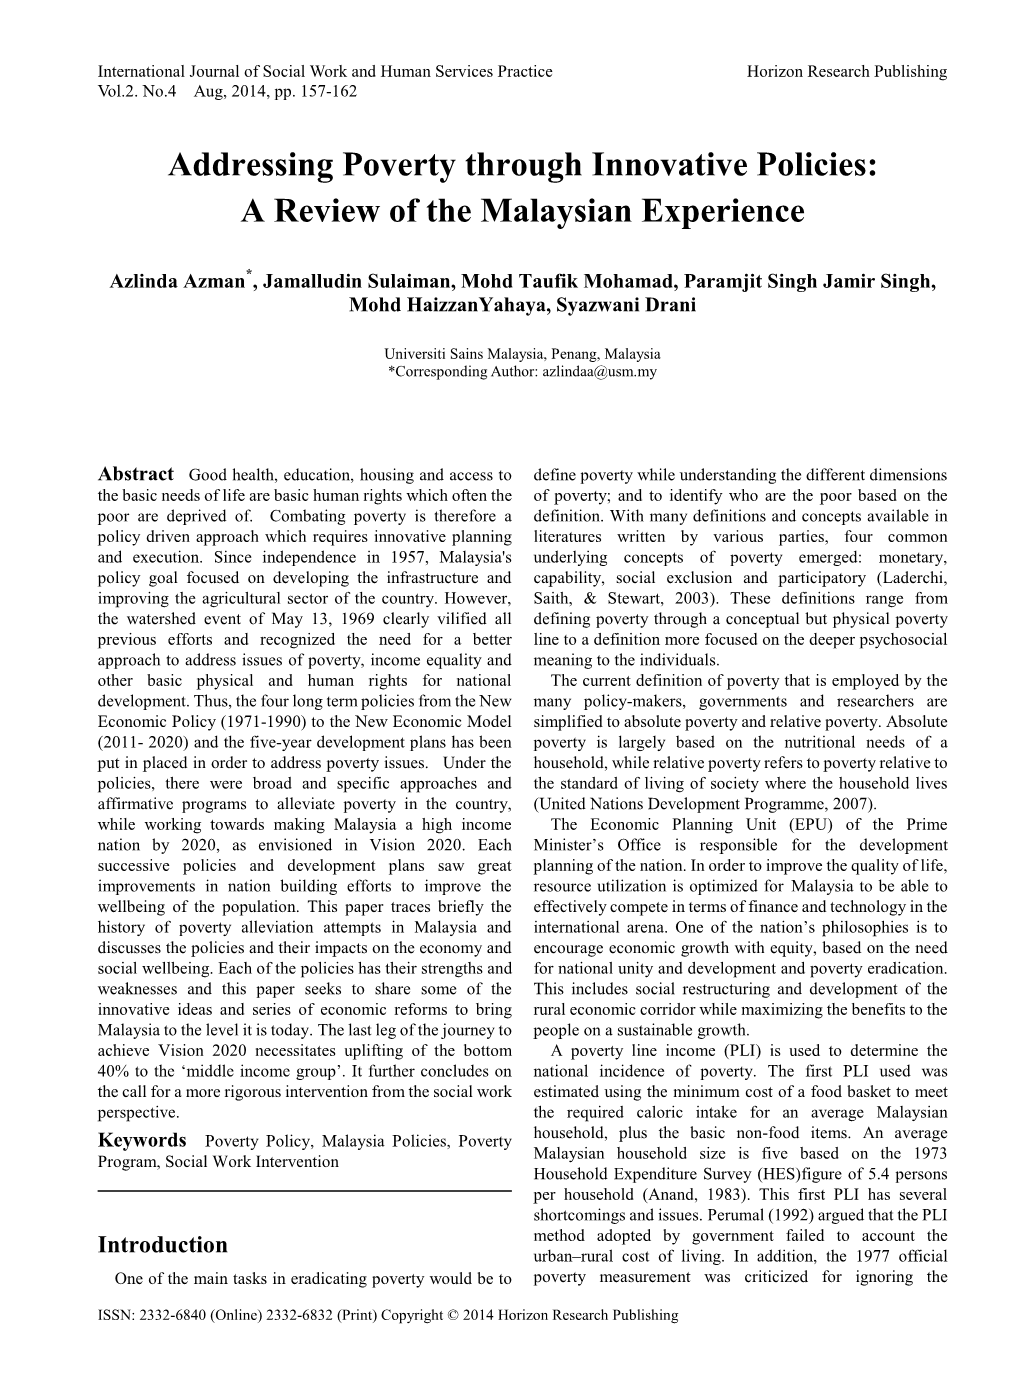 Addressing Poverty Through Innovative Policies: a Review of the Malaysian Experience